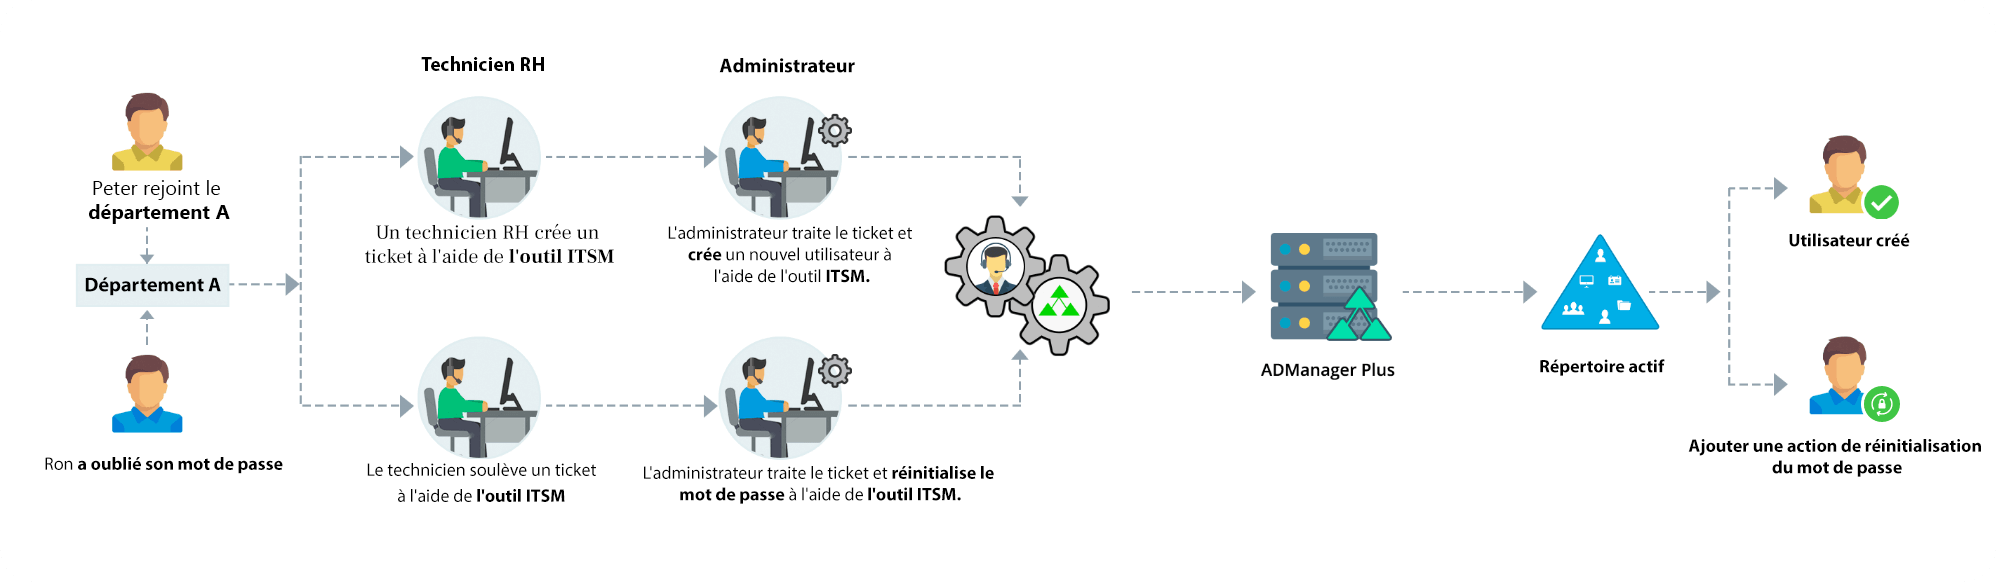 ITSM and help desk applications